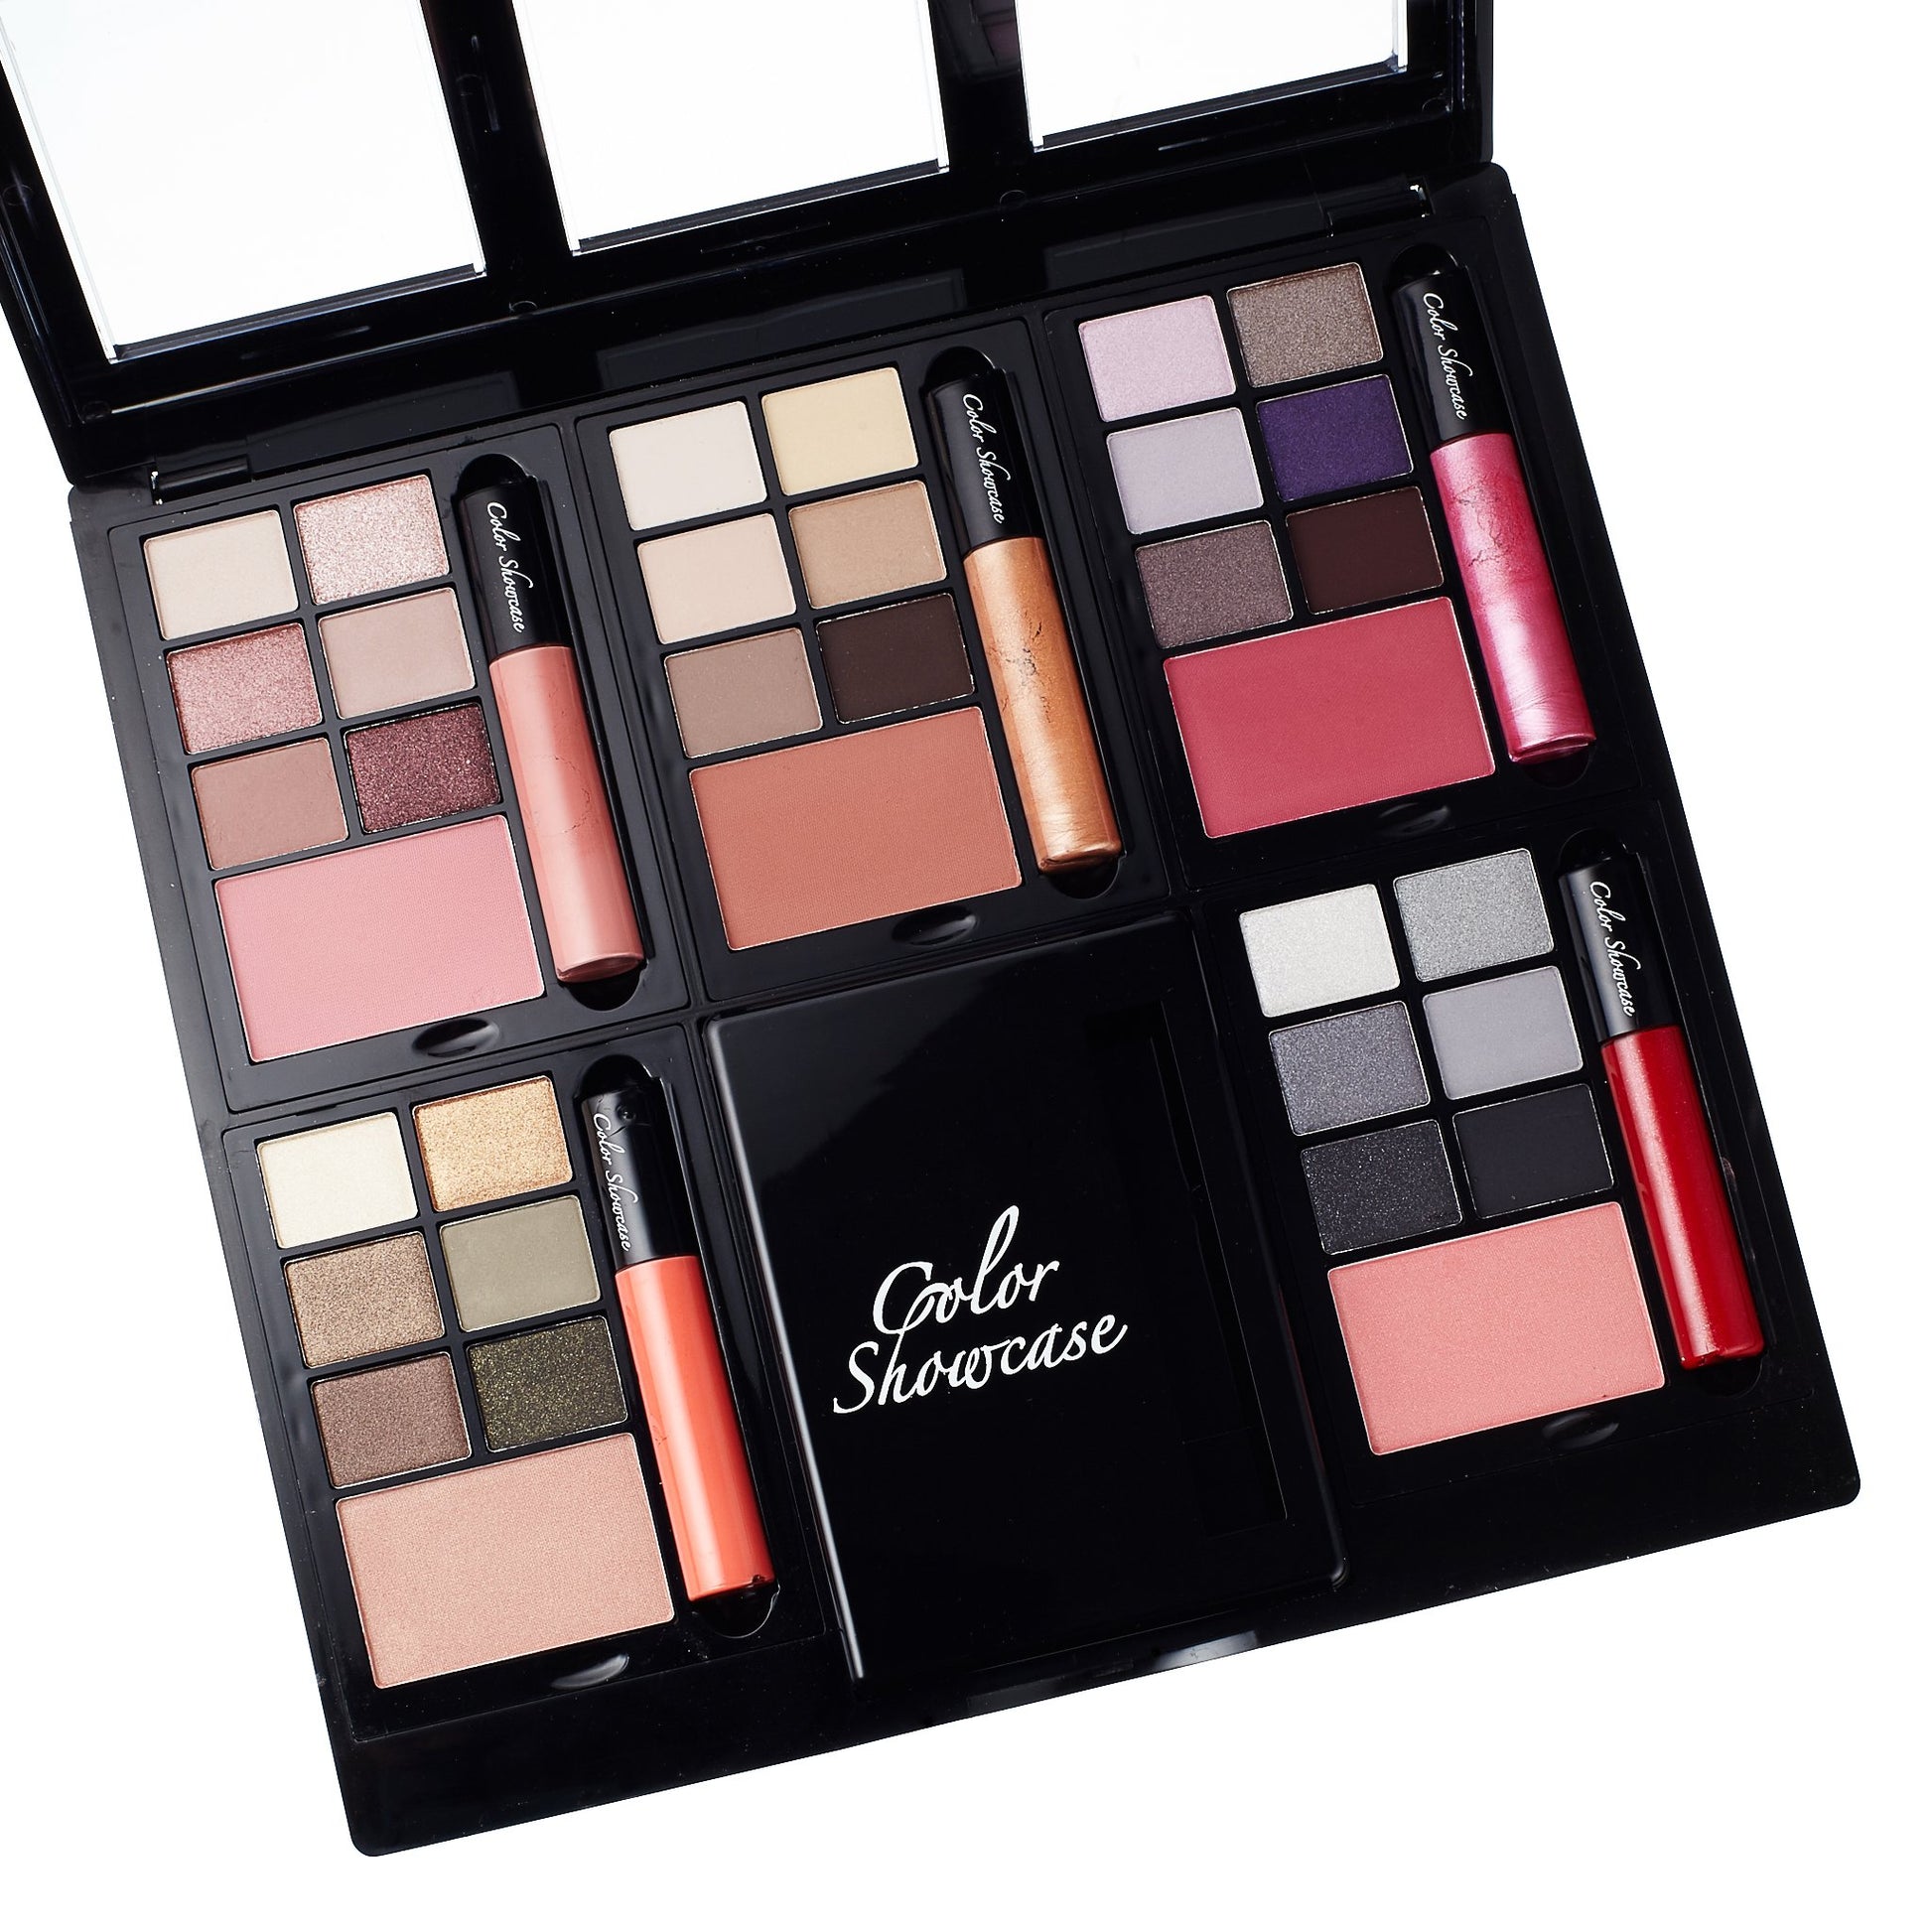 Color Show Case Travel Make Up Compact Set Pallet for Women Click to open in modal